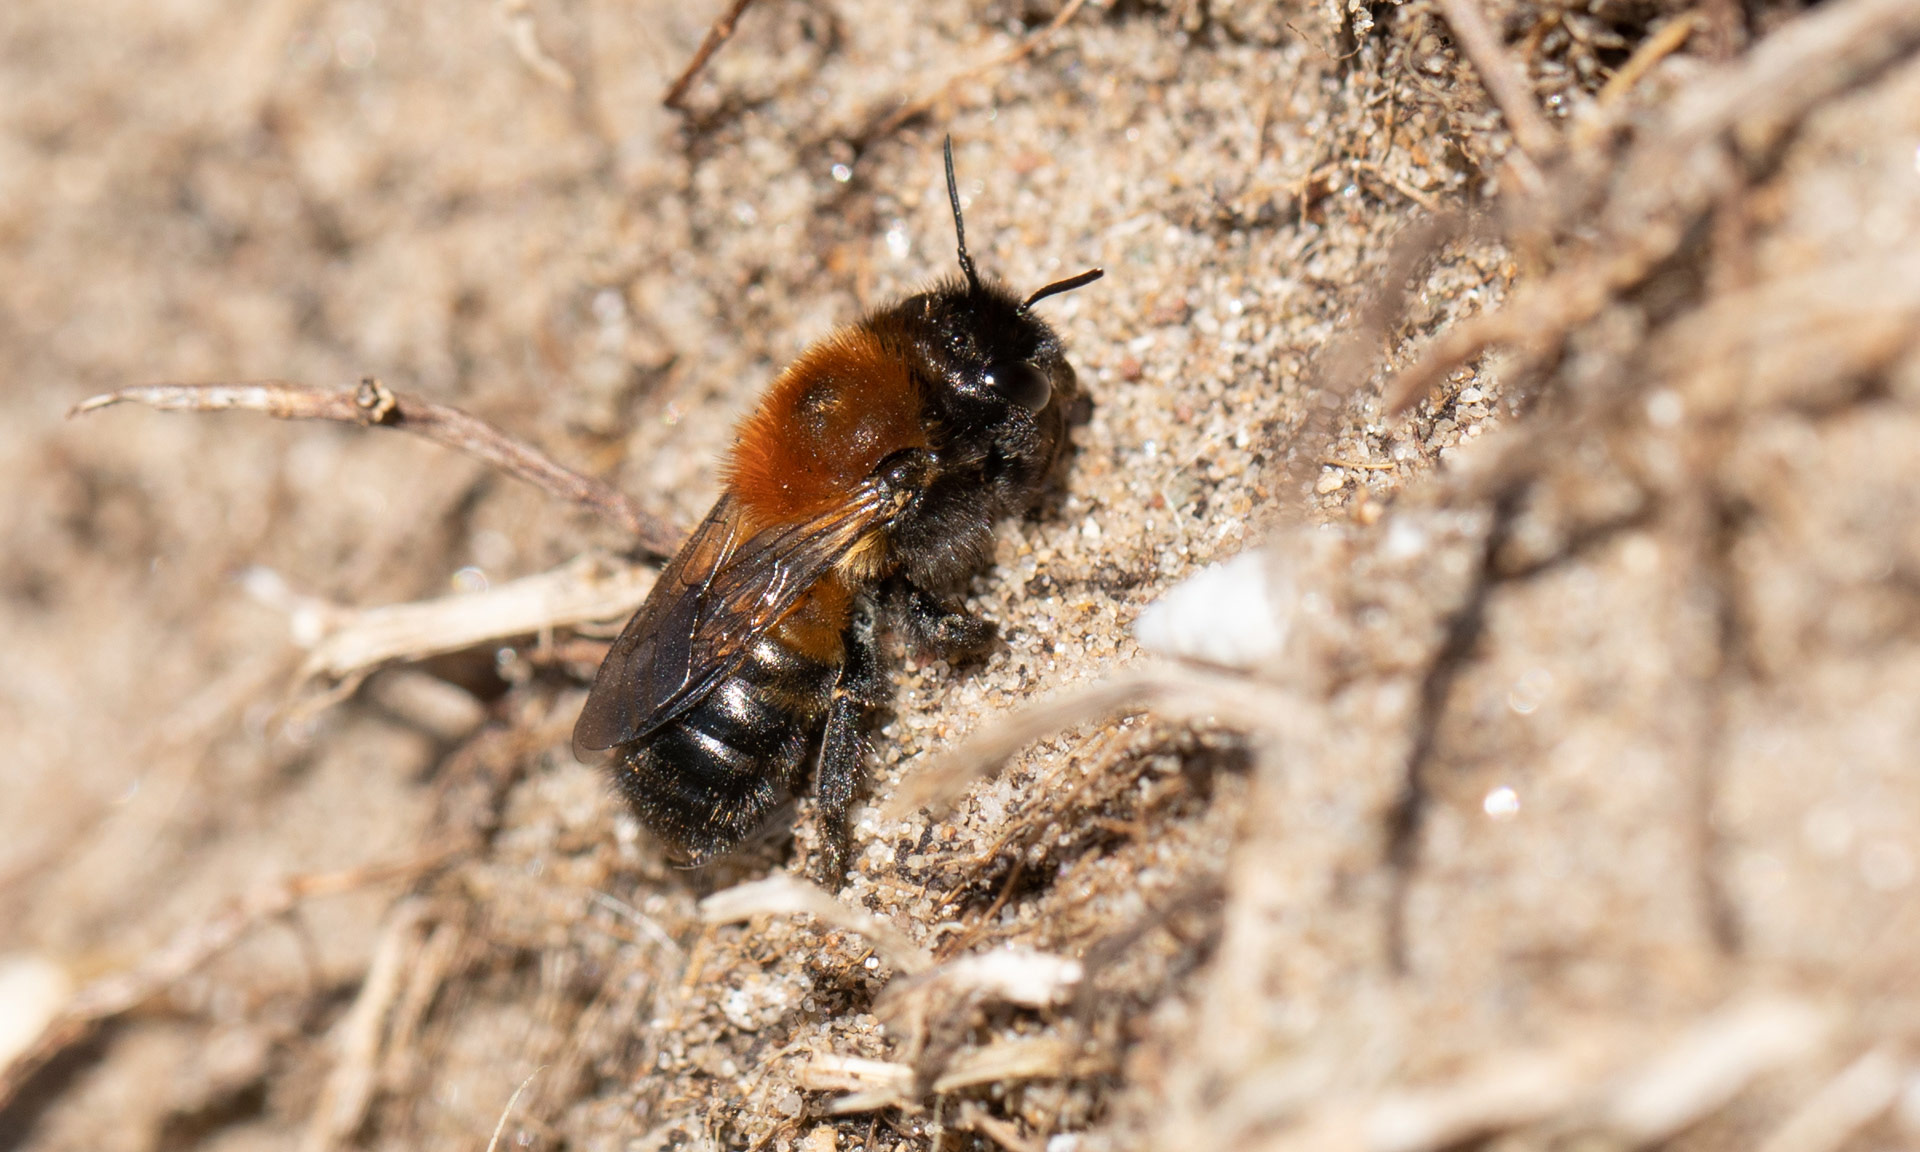 https://snowdonia.gov.wales/wp-content/uploads/2022/01/Large-Mason-bee-suspect-2-19th-May-2021.jpg